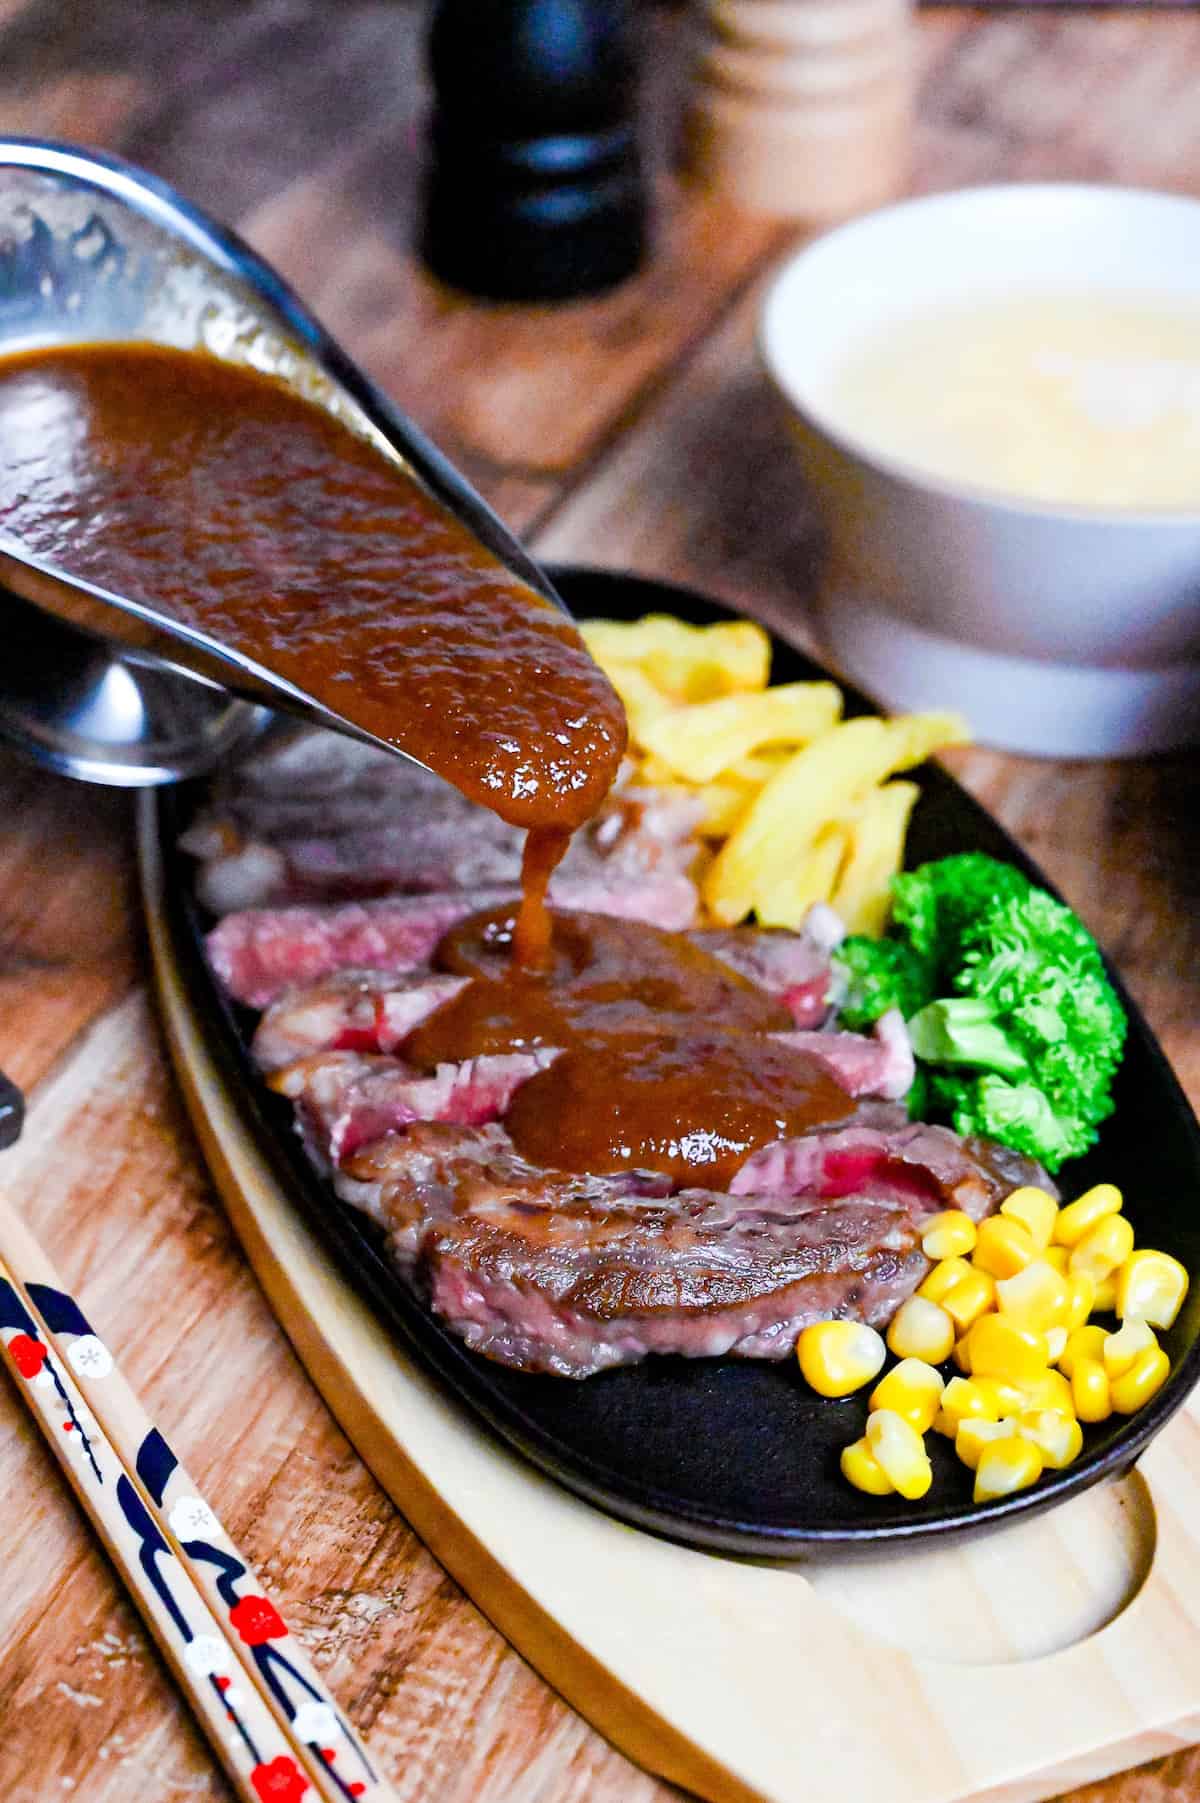 slices of rare steak drizzled with Japanese style steak sauce served on a black hotplate with fries, broccoli and corn next to a steel gravy boat filled with steak sauce